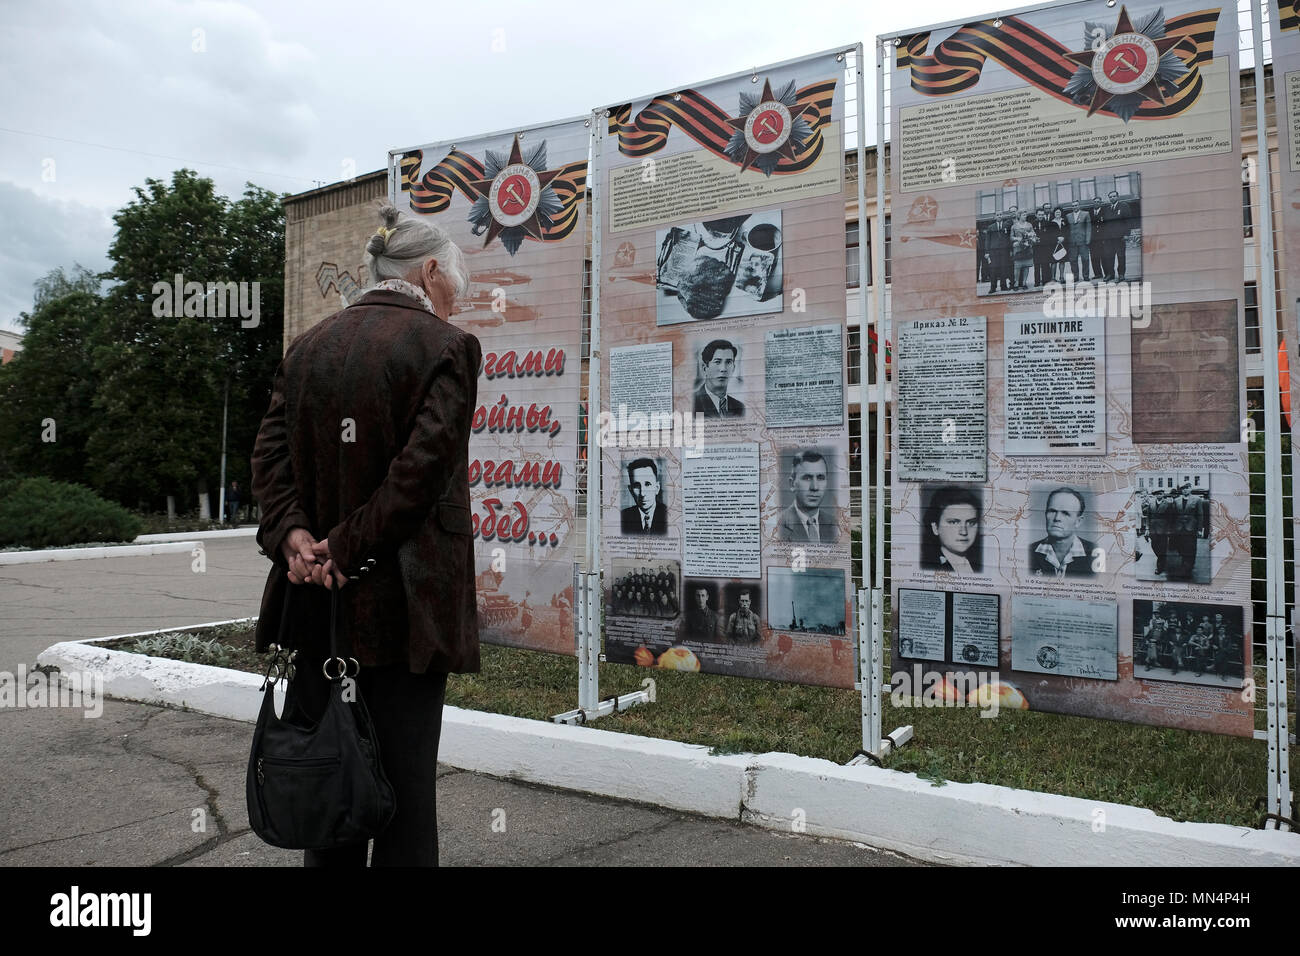 An elderly Transnistrian woman stands next to stands with old photographs of Russians who fought during World War II during the Victory Day on 9th of May which commemorates the victory of the Soviet Union over Nazi Germany in the city of Bender de facto official name Bendery within the internationally recognized borders of Moldova under de facto control of the unrecognized Pridnestrovian Moldavian Republic also called Transnistria (PMR) since 1992. Stock Photo